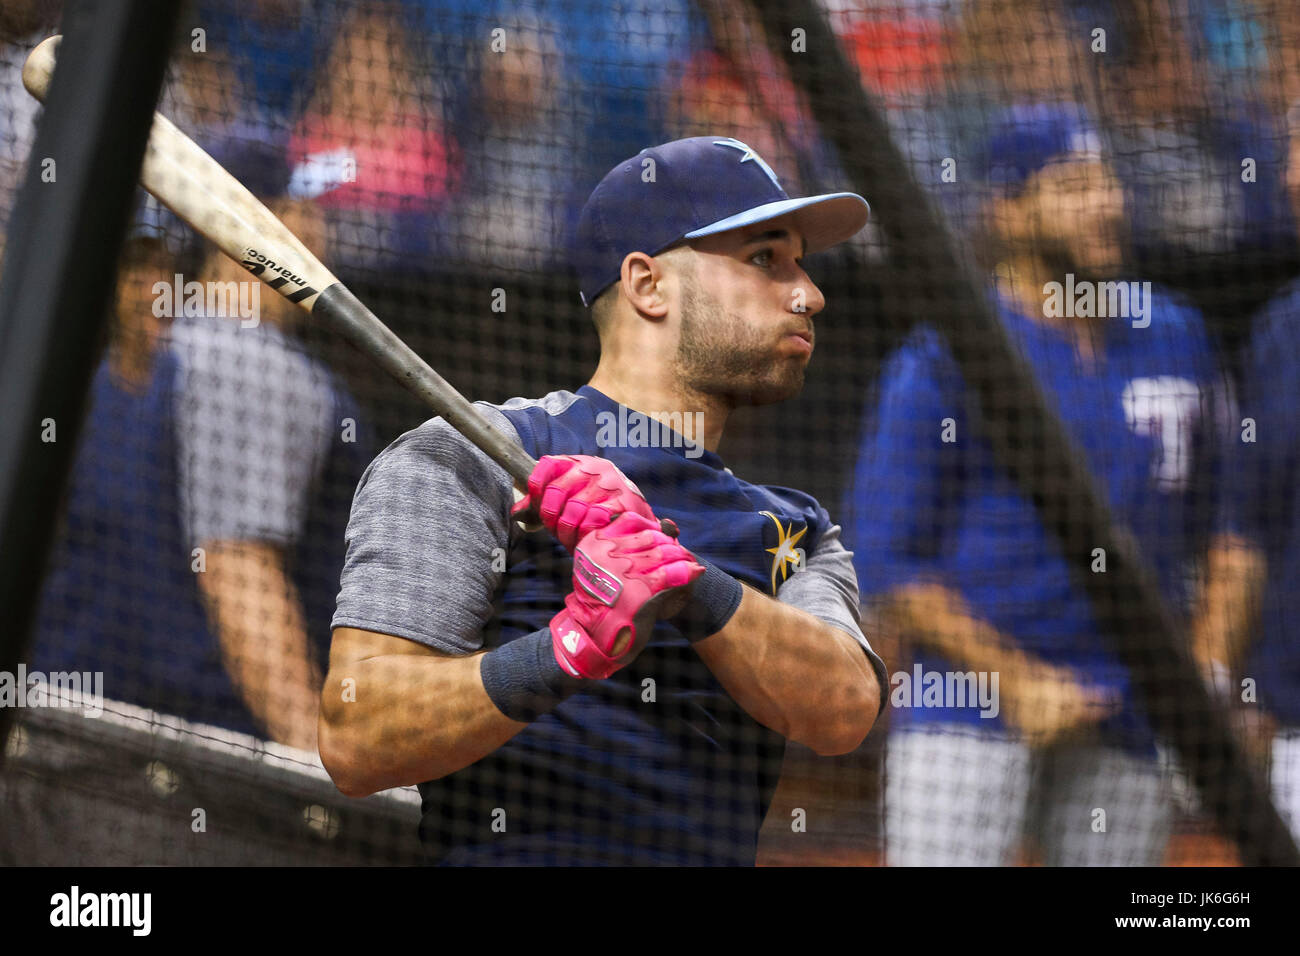 St. Petersburg, Florida, USA. 22nd July, 2017. WILL VRAGOVIC | Times.Tampa Bay Rays center fielder Kevin Kiermaier (39) takes cuts in the cage during batting practice before the game between the Texas Rangers and the Tampa Bay Rays at Tropicana Field in St. Petersburg, Fla. on Saturday, July 22, 2017. Credit: Will Vragovic/Tampa Bay Times/ZUMA Wire/Alamy Live News Stock Photo